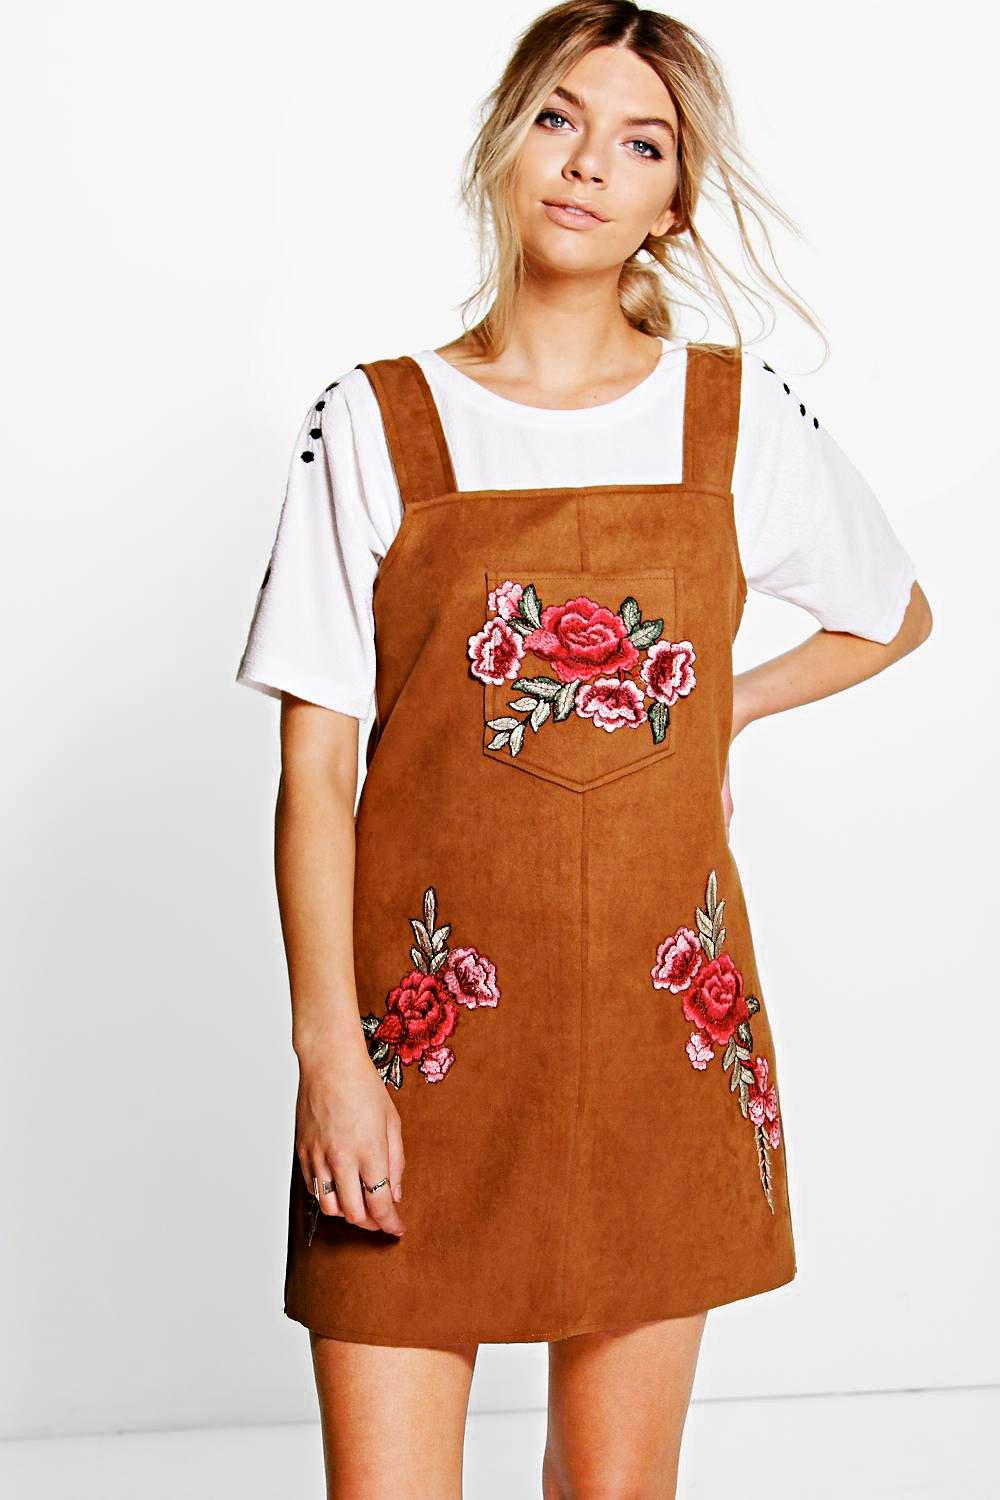 suede pinafore dress